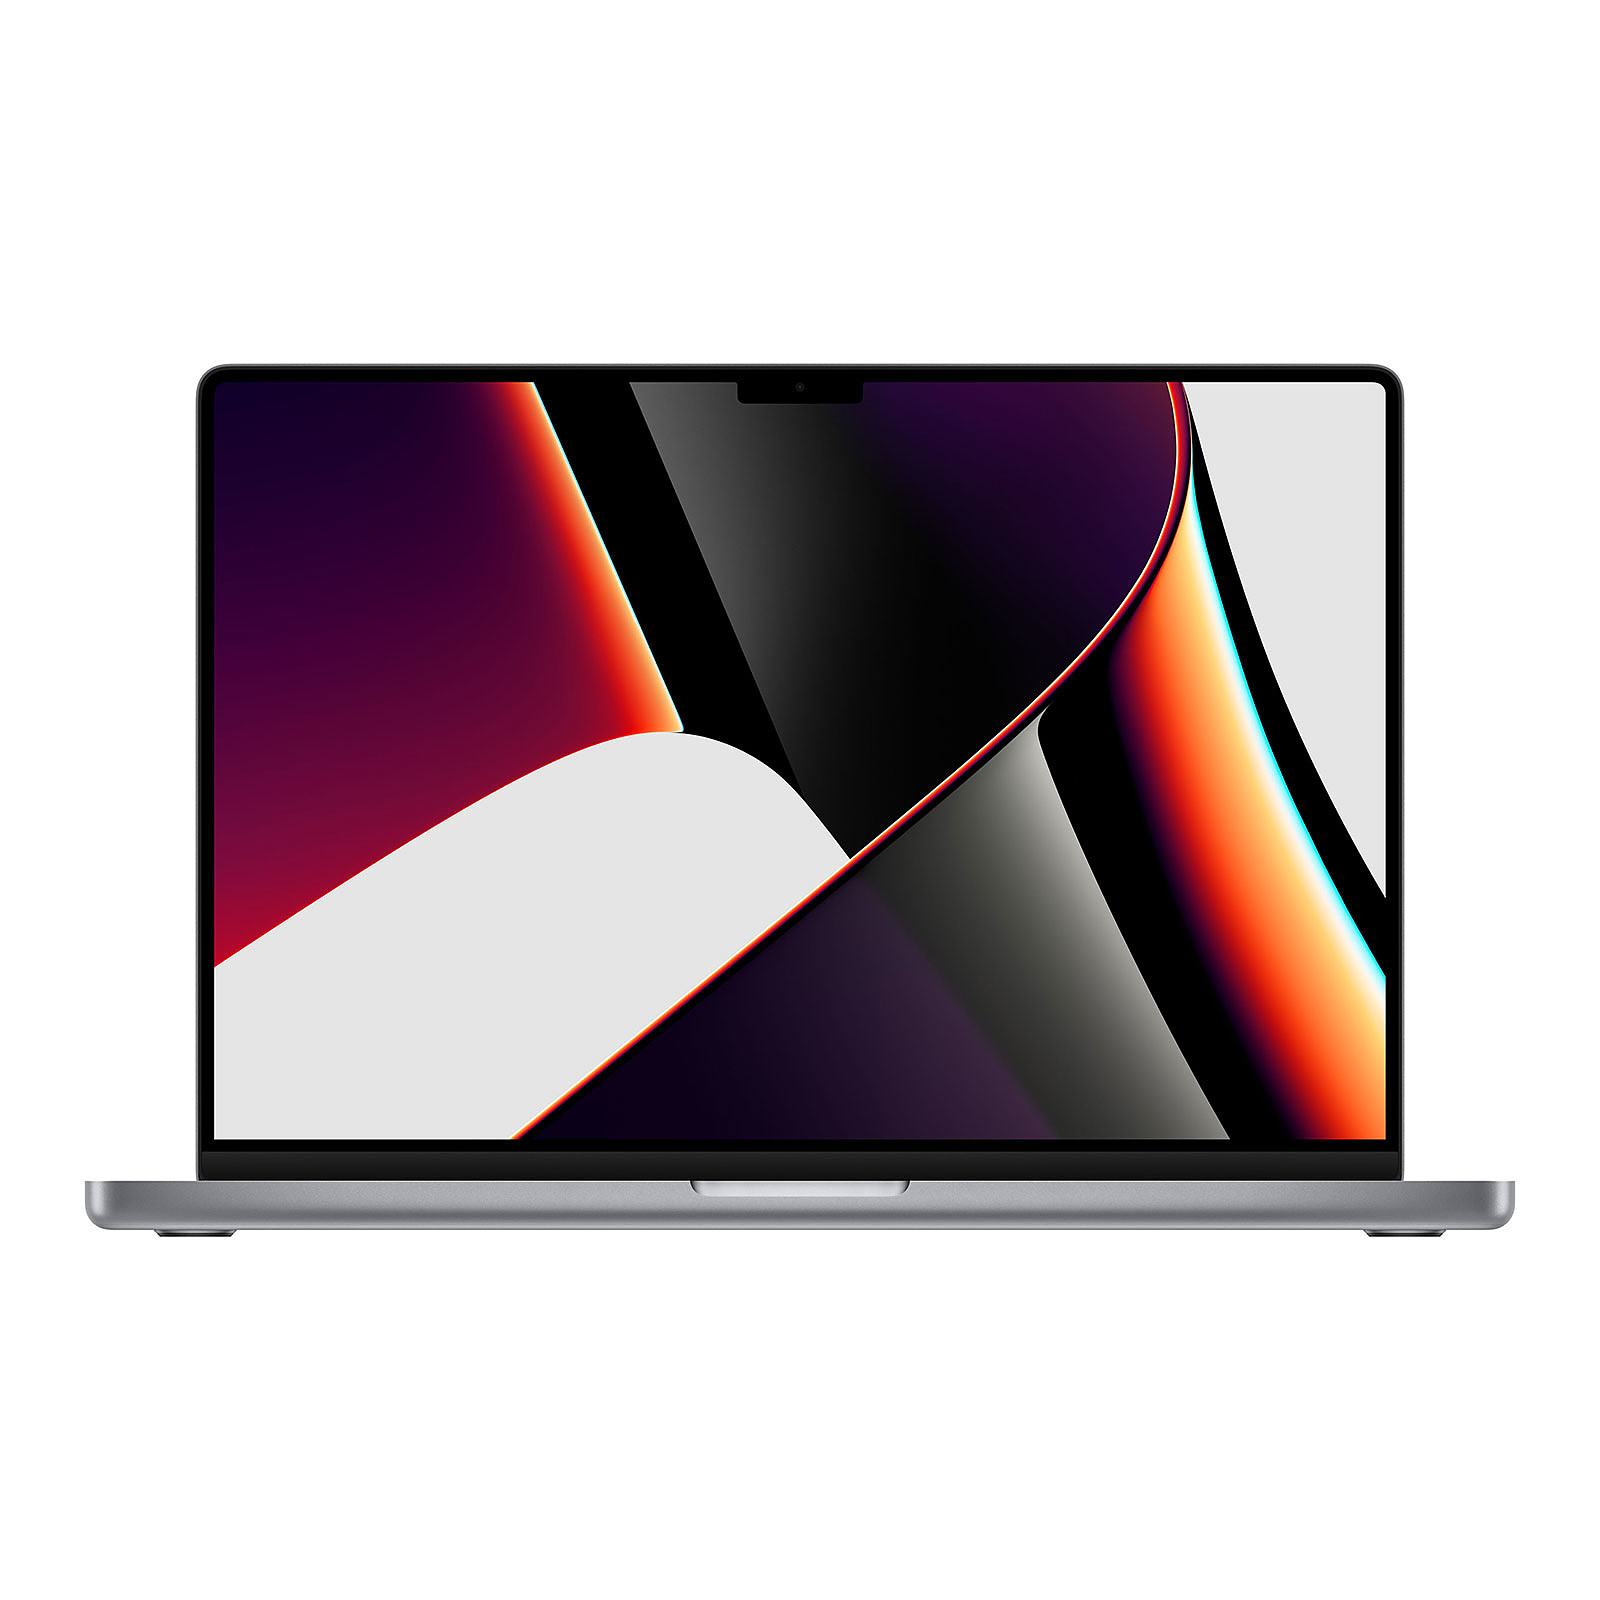 Apple MacBook Pro M1 Pro (2021) 16" Gris sideral 32Go/1To (MK193FN/A-M1-MAX-32GB-1TB) - MacBook Apple